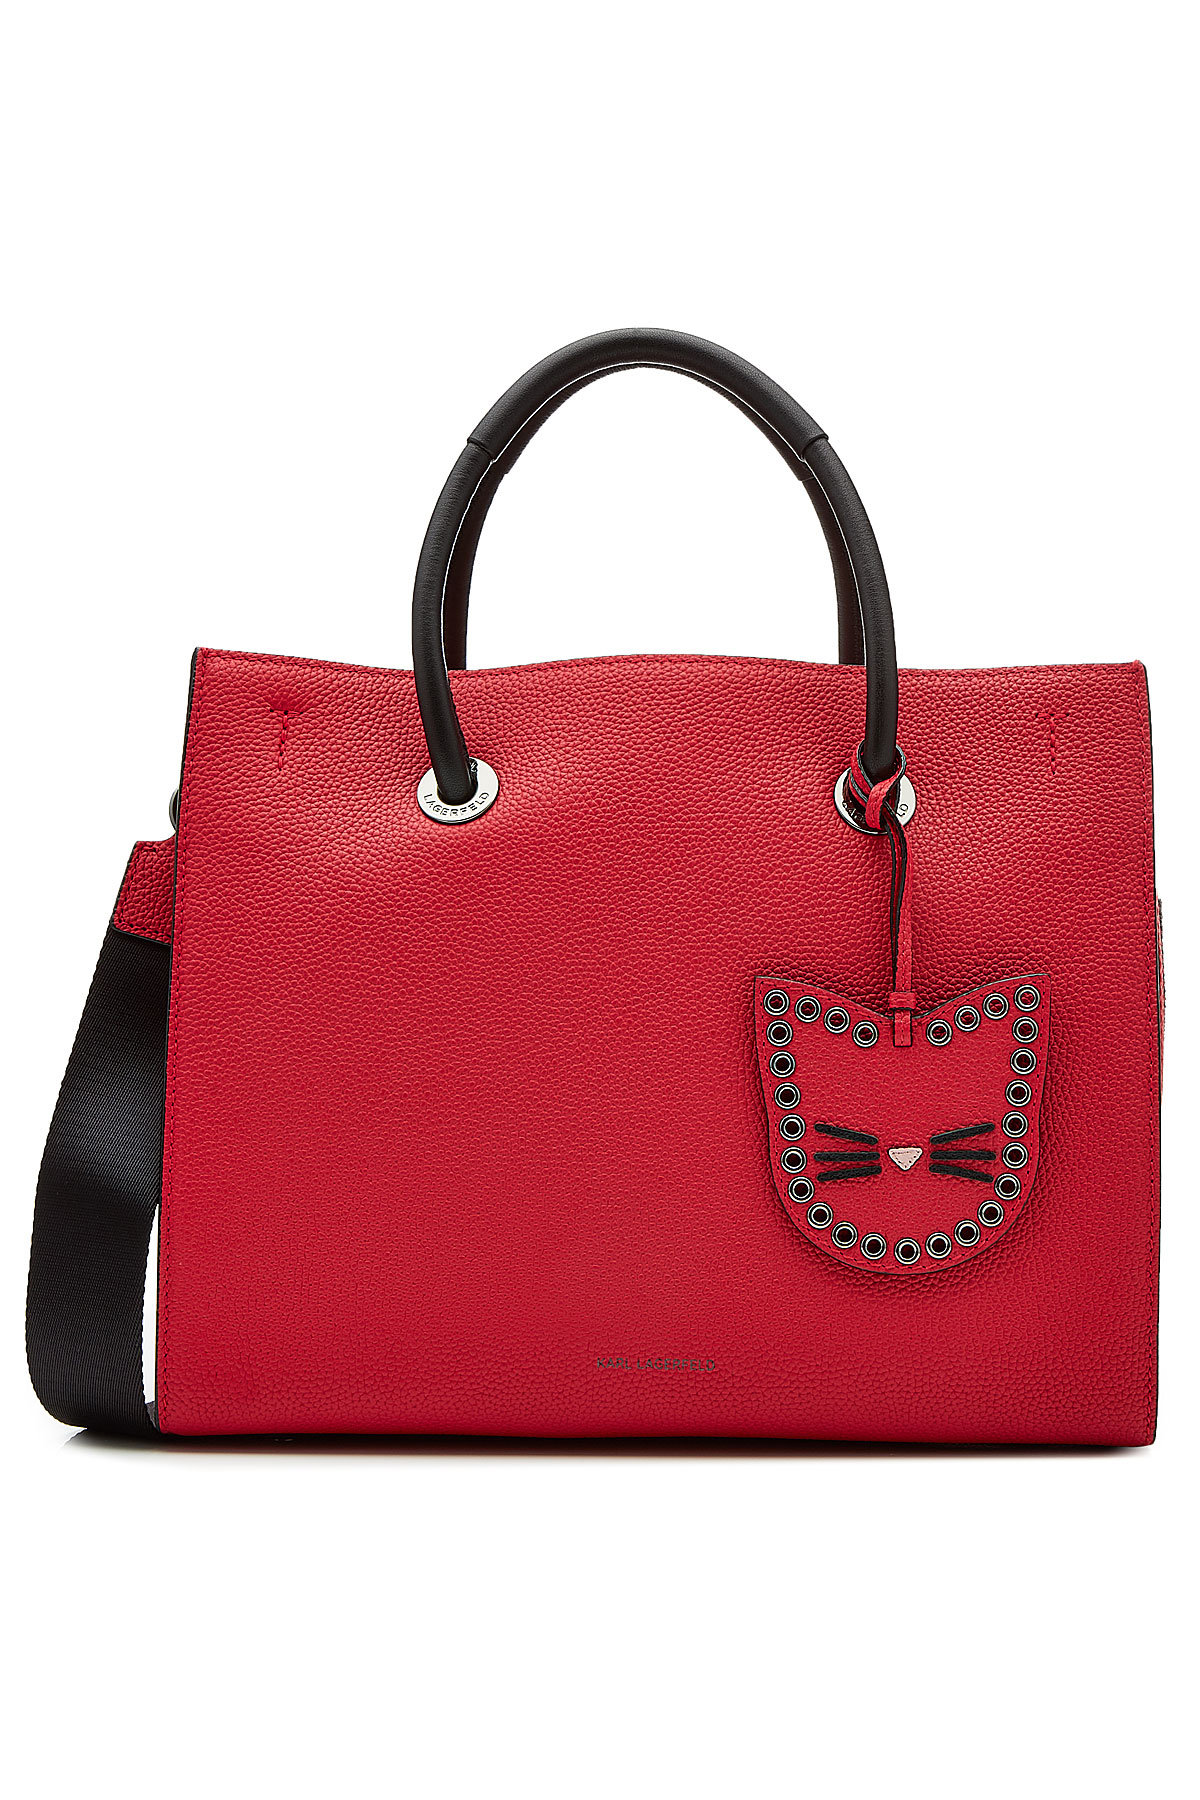 K/Karry All Leather Tote by Karl Lagerfeld